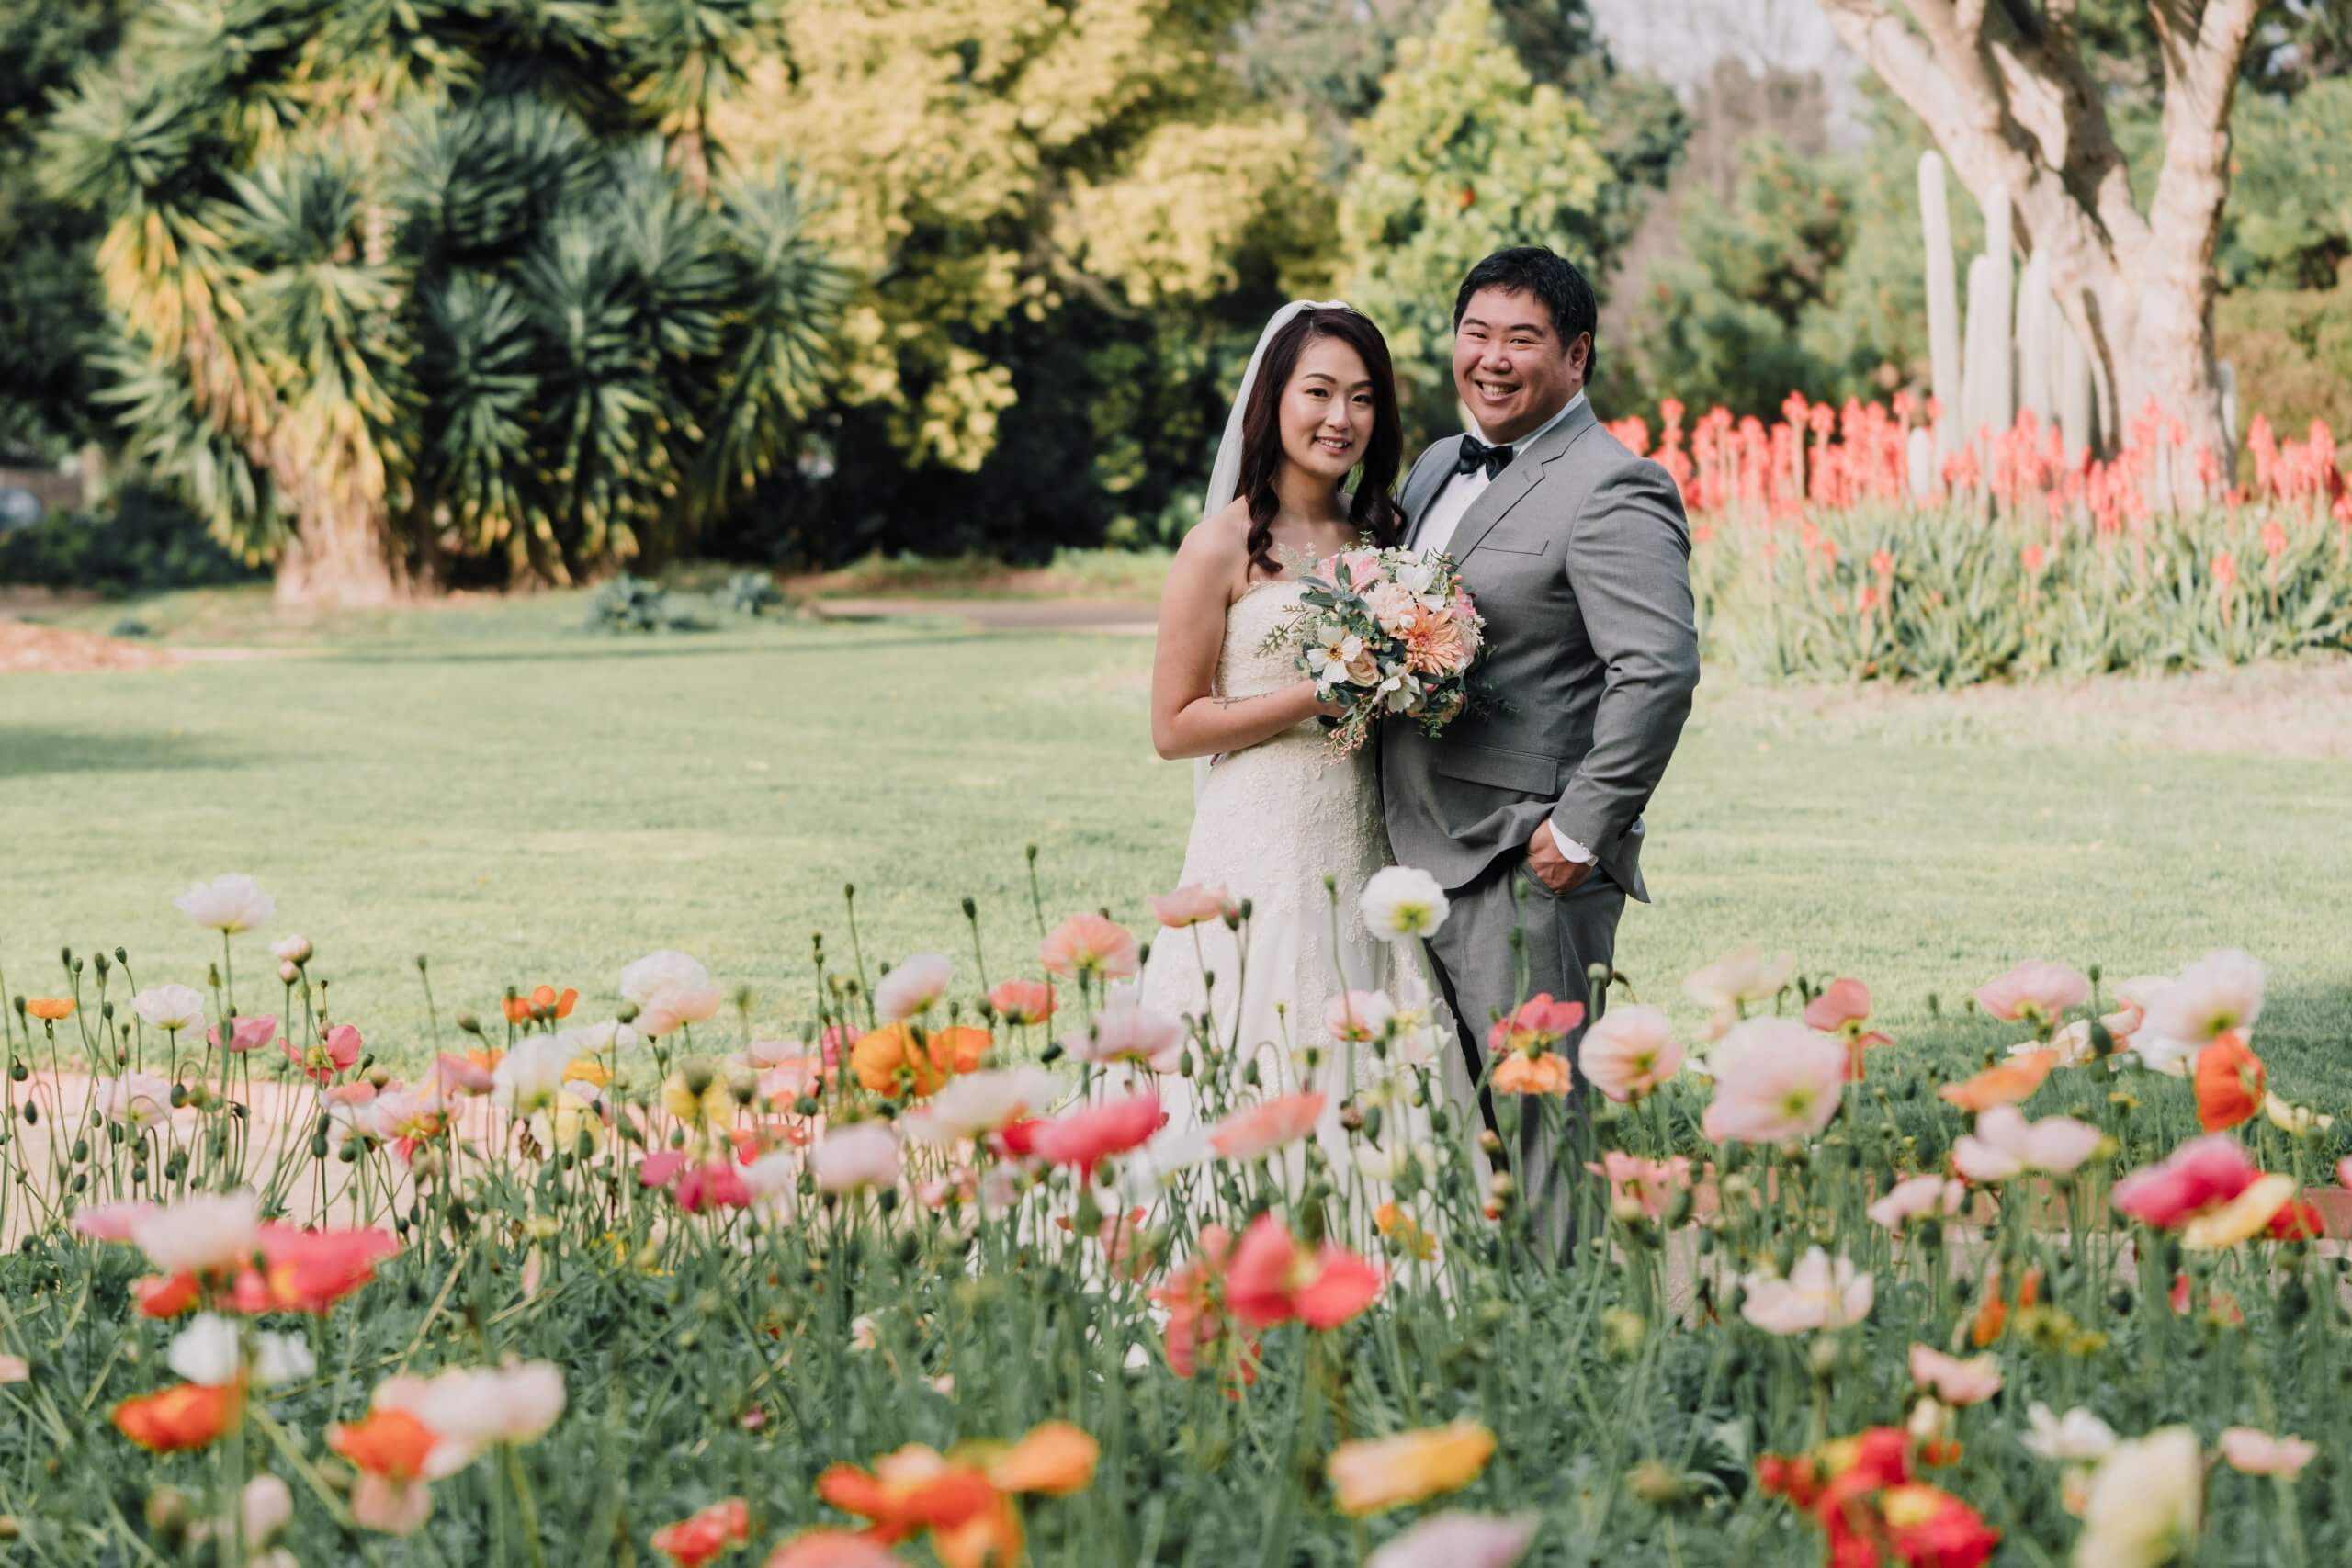 Bride and groom in a garden surrounded by blooming flowers.